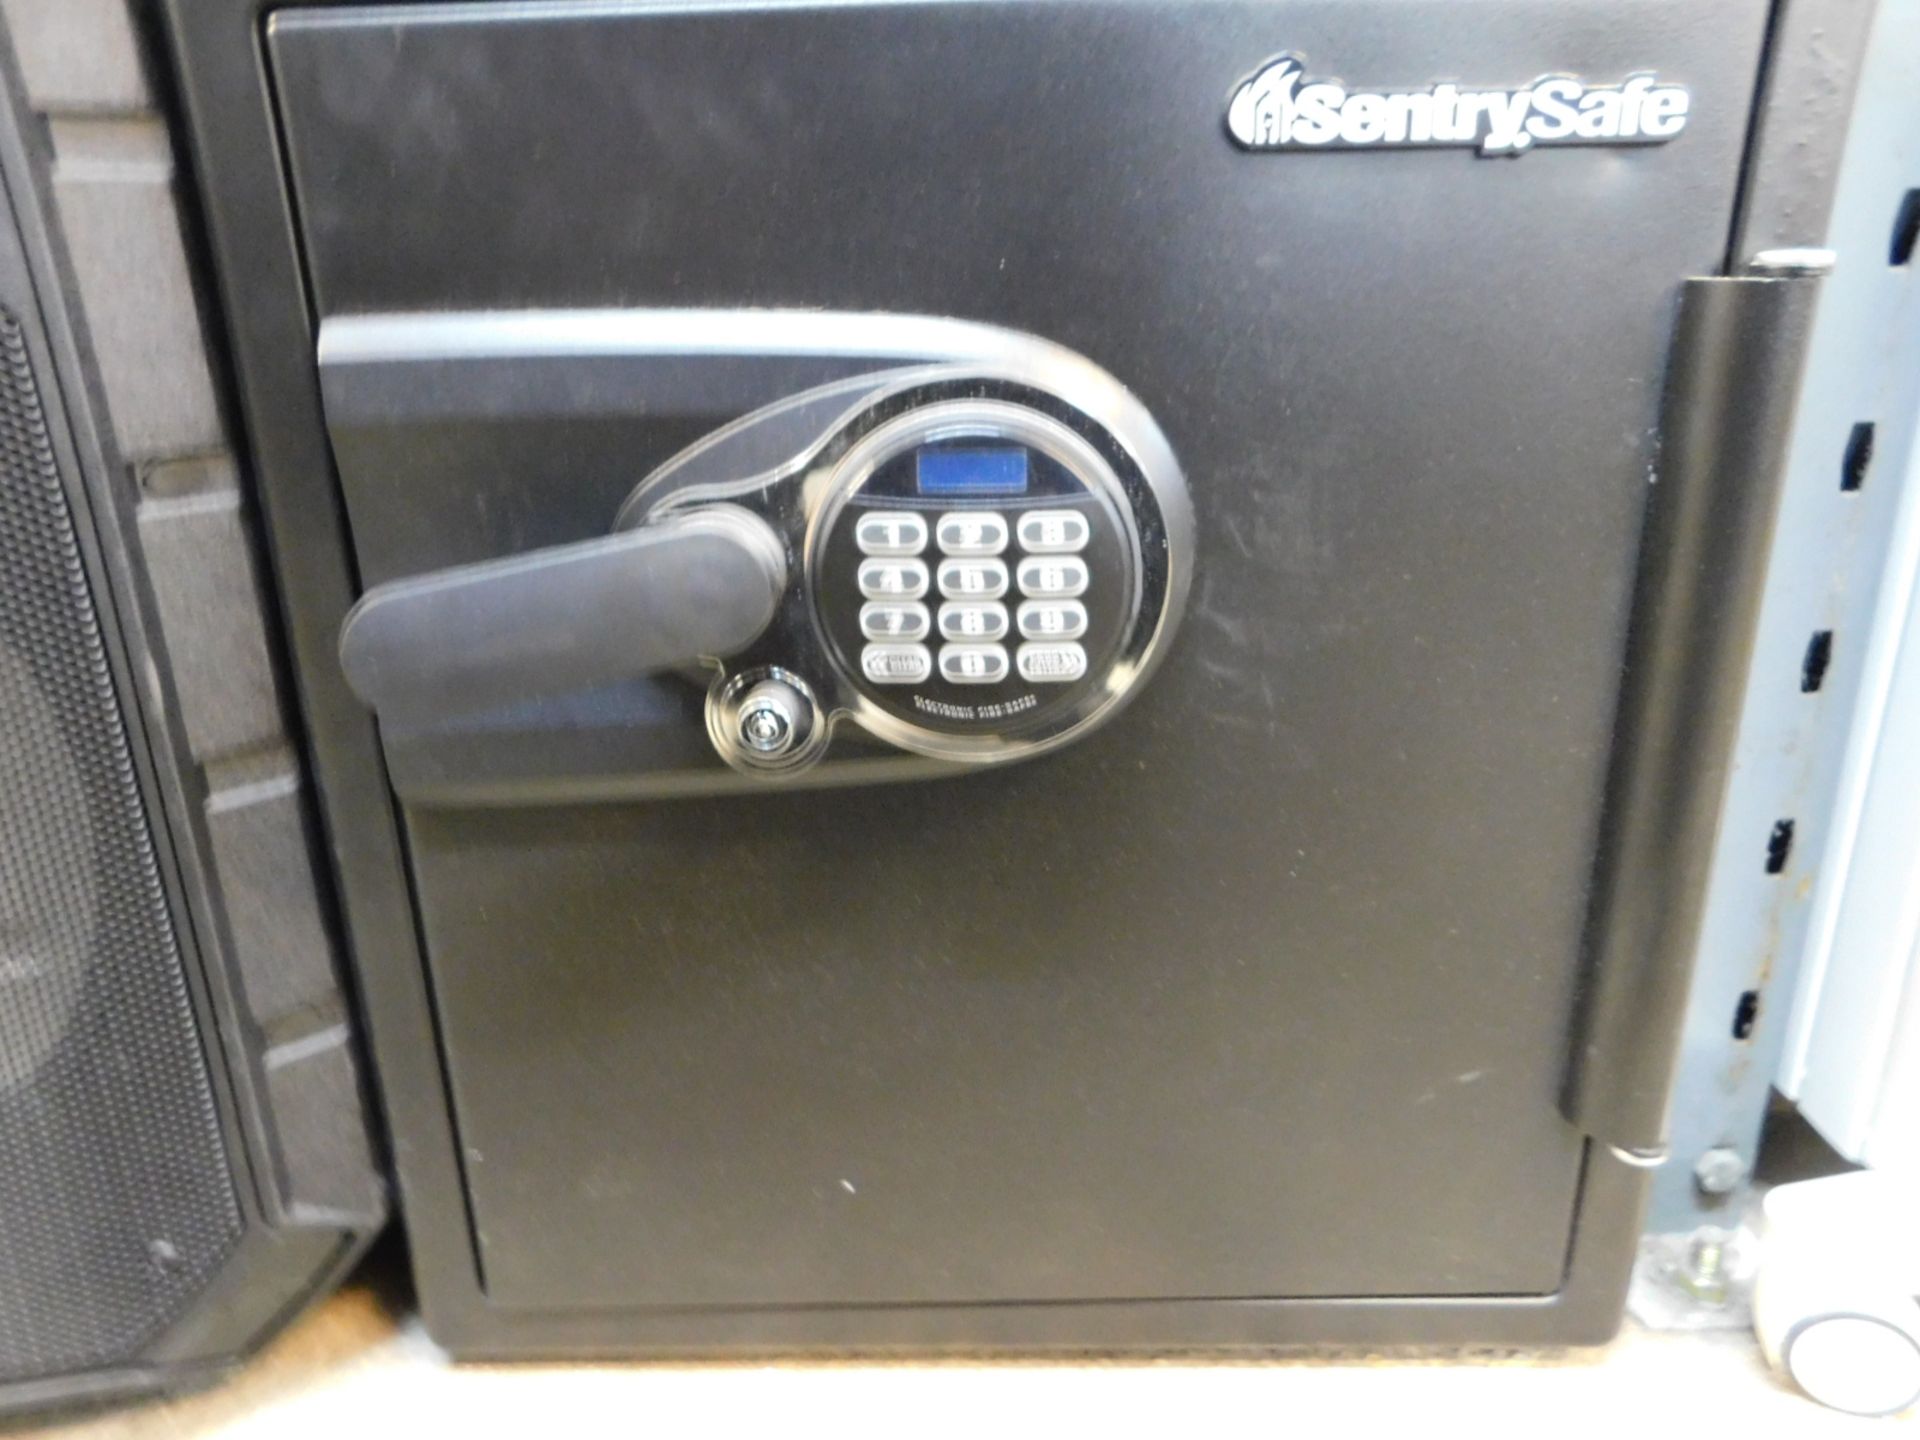 1 SENTRYSAFE DIGITAL FIRE & WATER SAFE WITH 2FT CAPACITY RRP Â£649